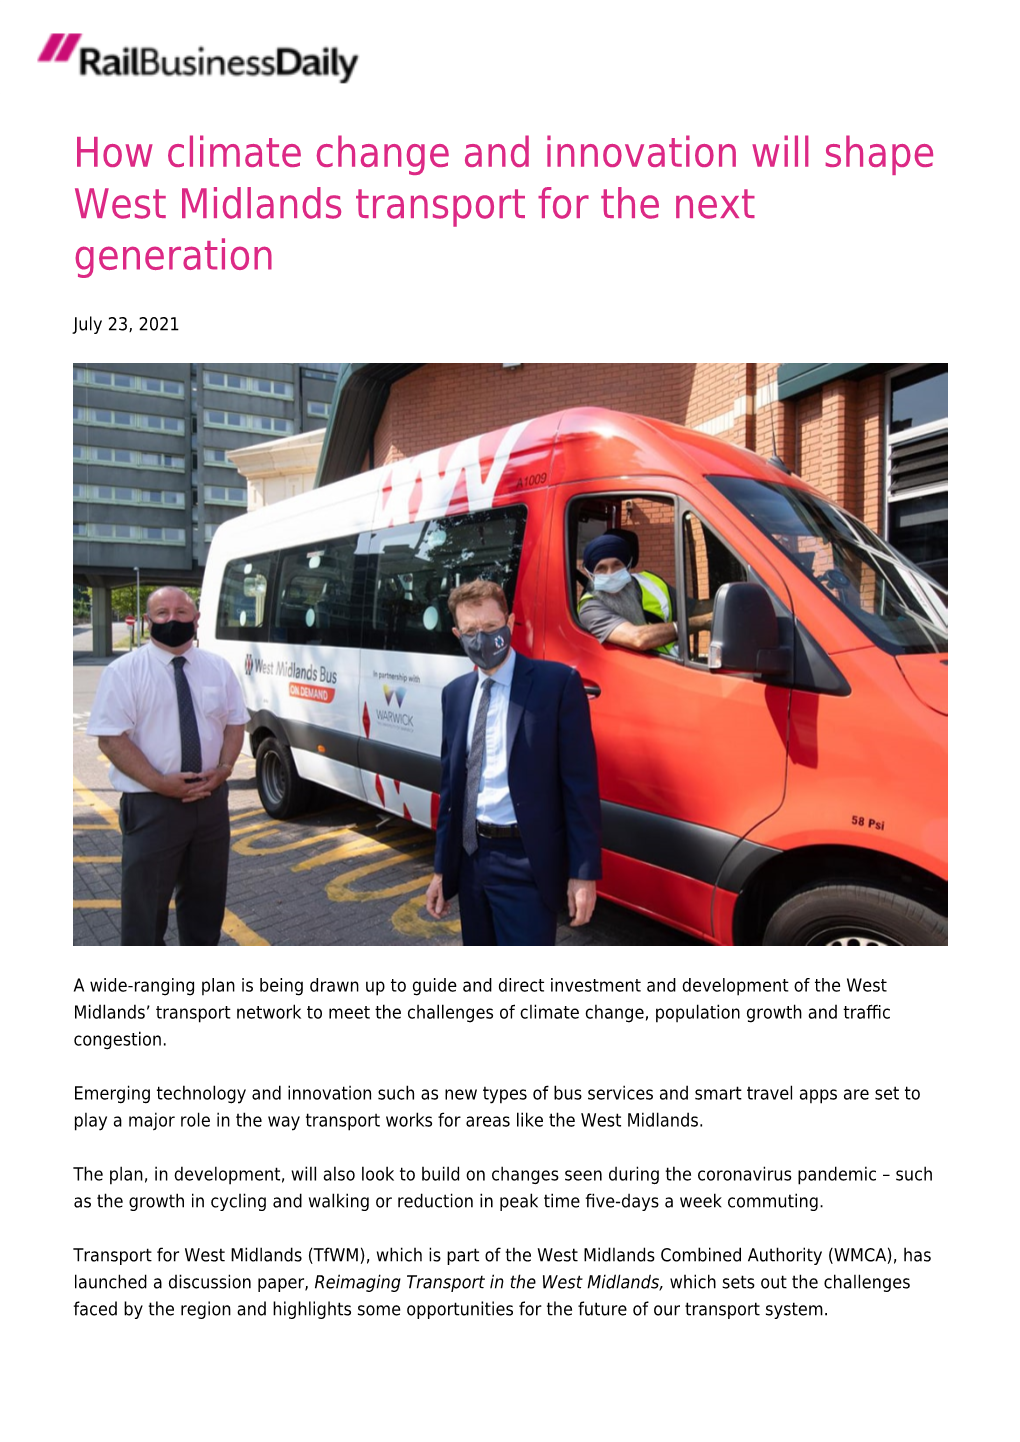 How Climate Change and Innovation Will Shape West Midlands Transport for the Next Generation